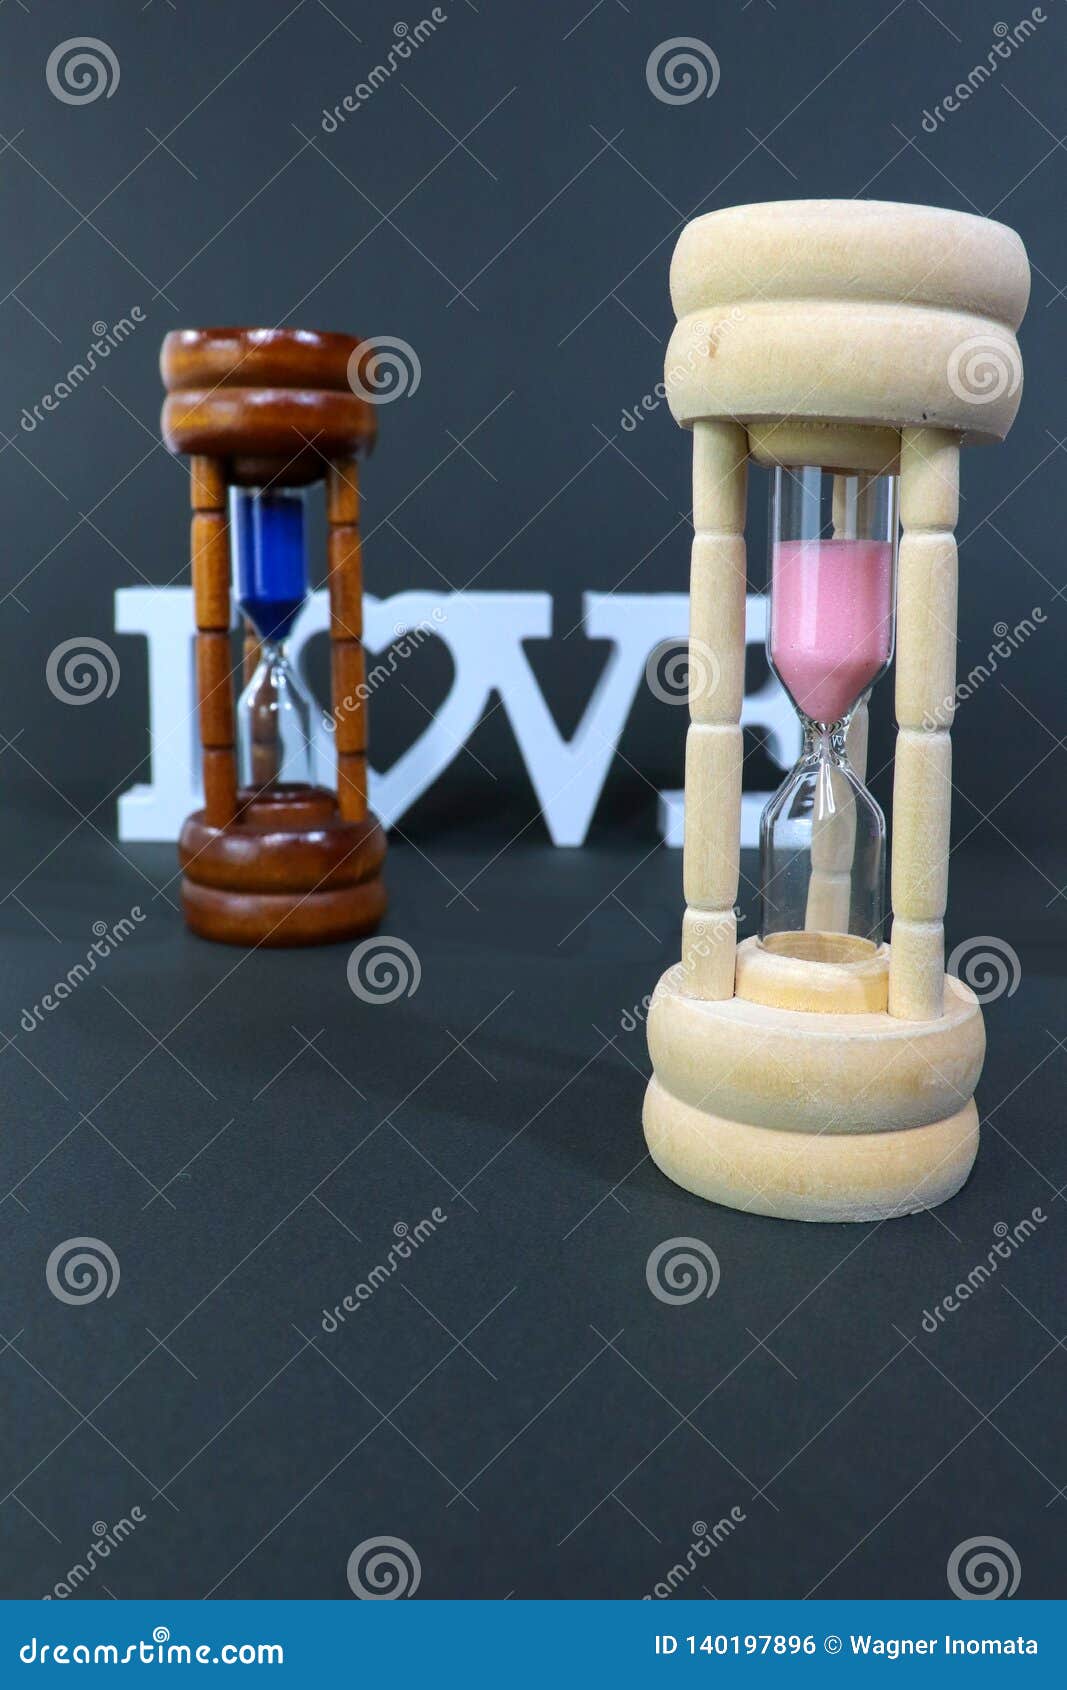 sand clock representing woman in front of man